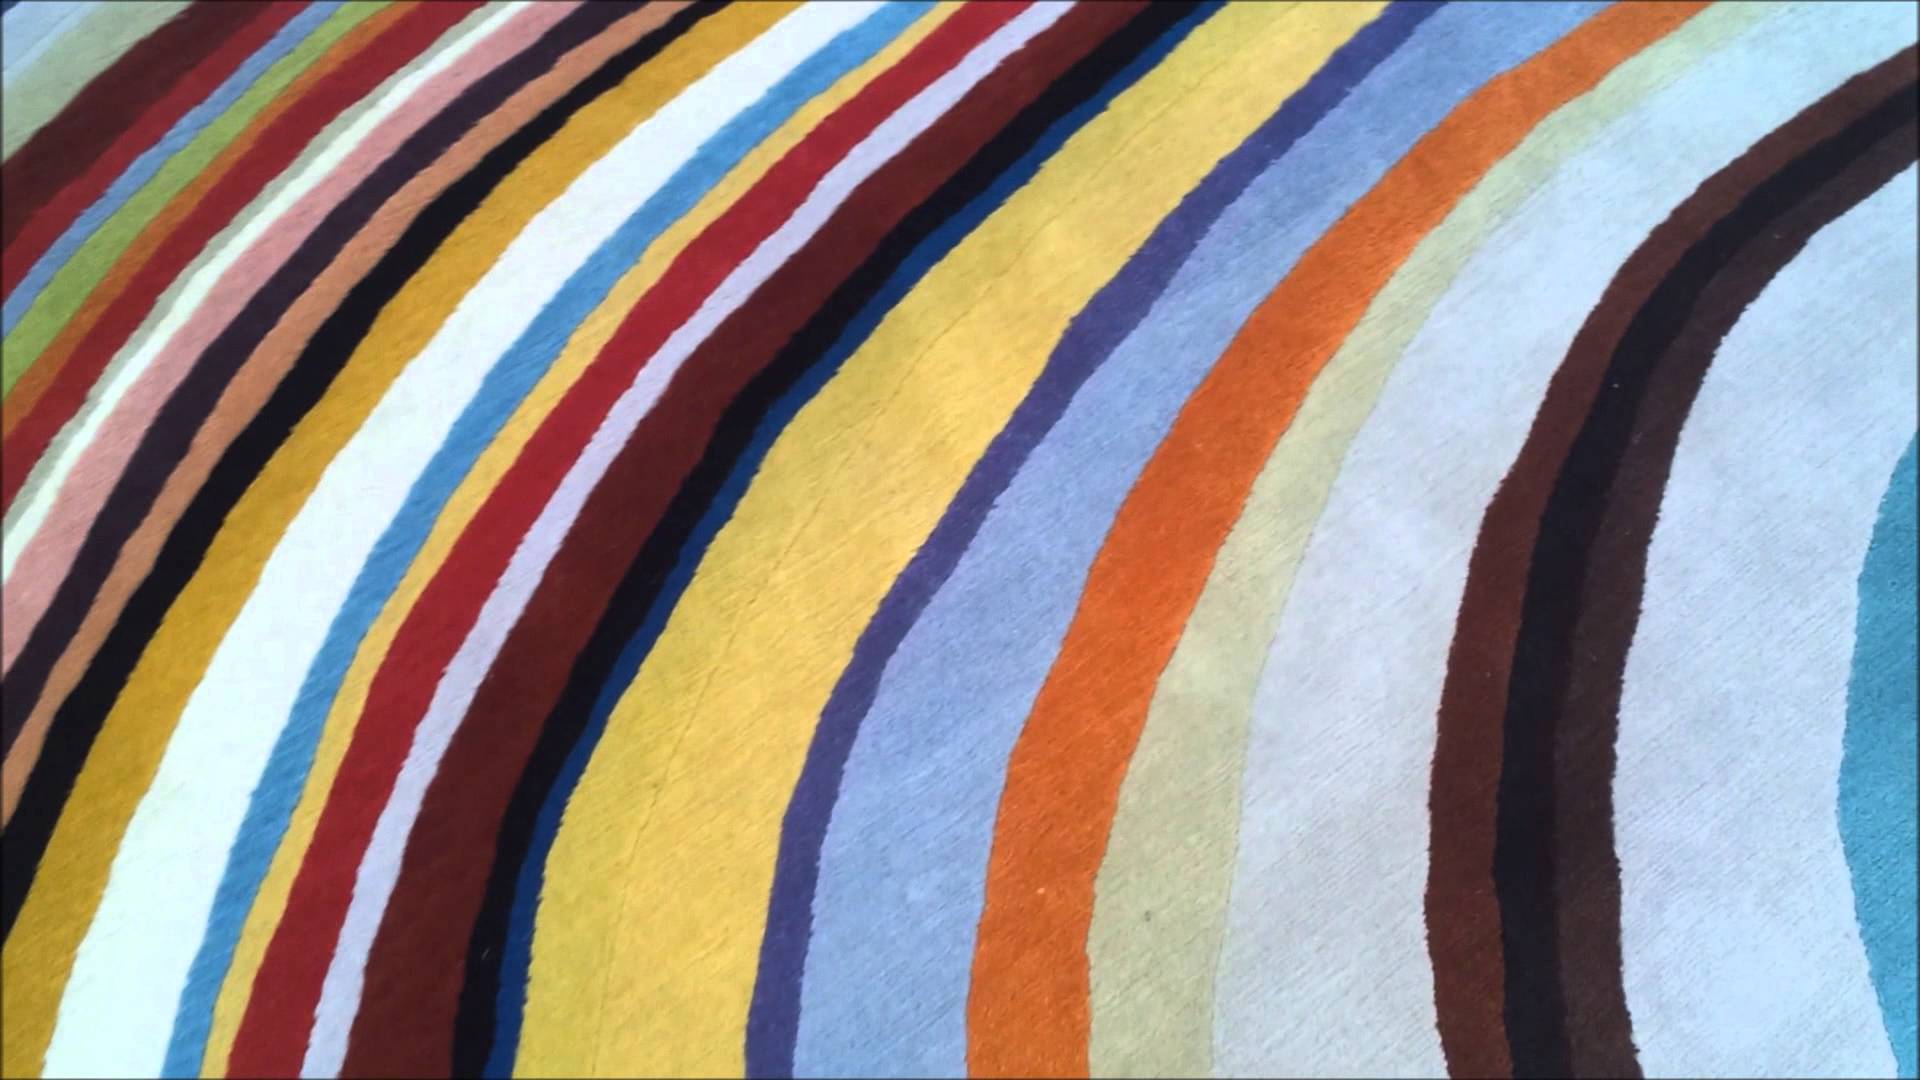 Plymouth Rug Cleaning -Designer Paul Smith Rug - YouTube